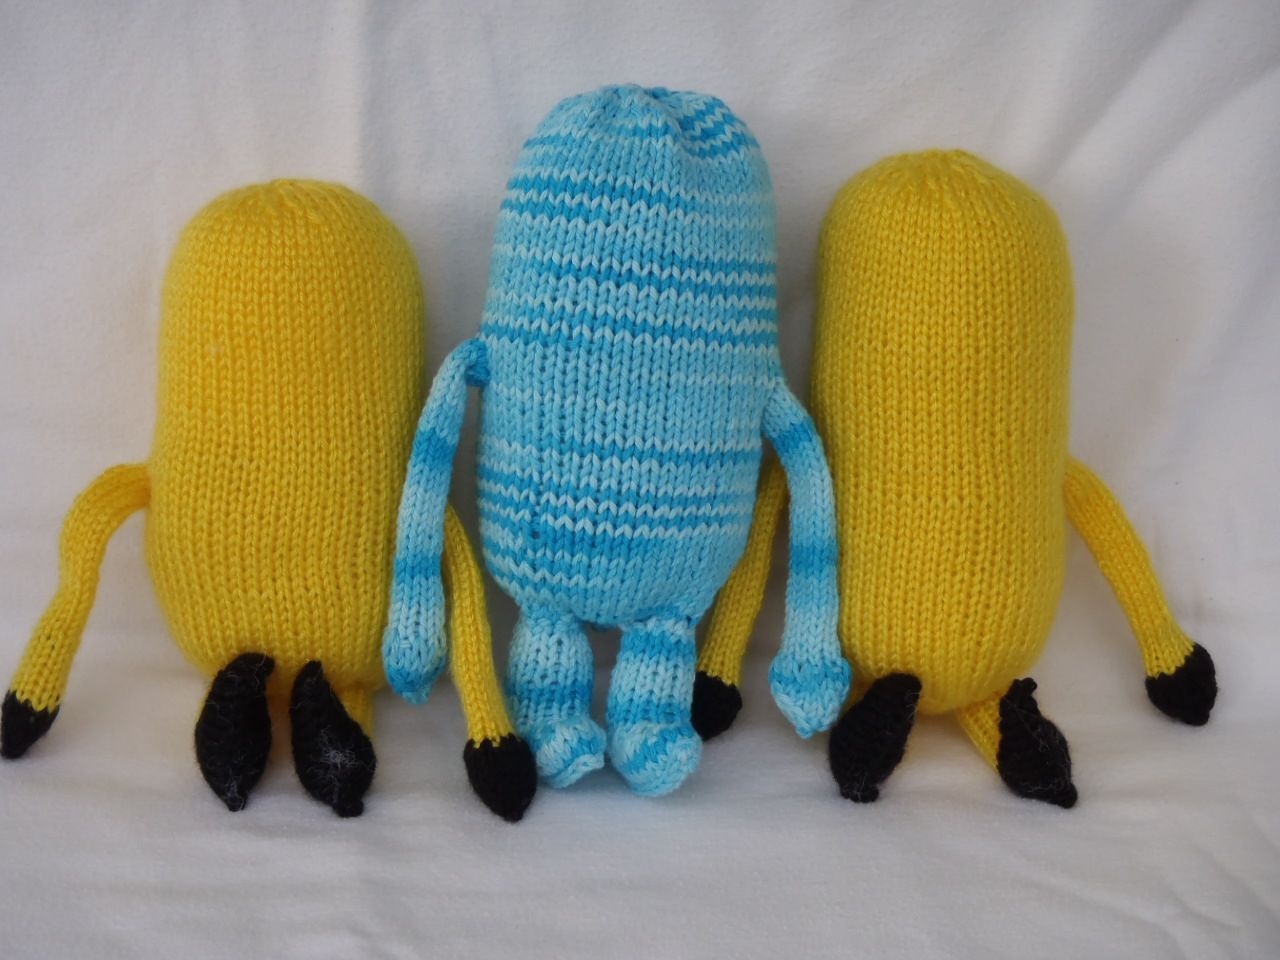 30+Great Photo of Knitting Patterns For Minions # ...